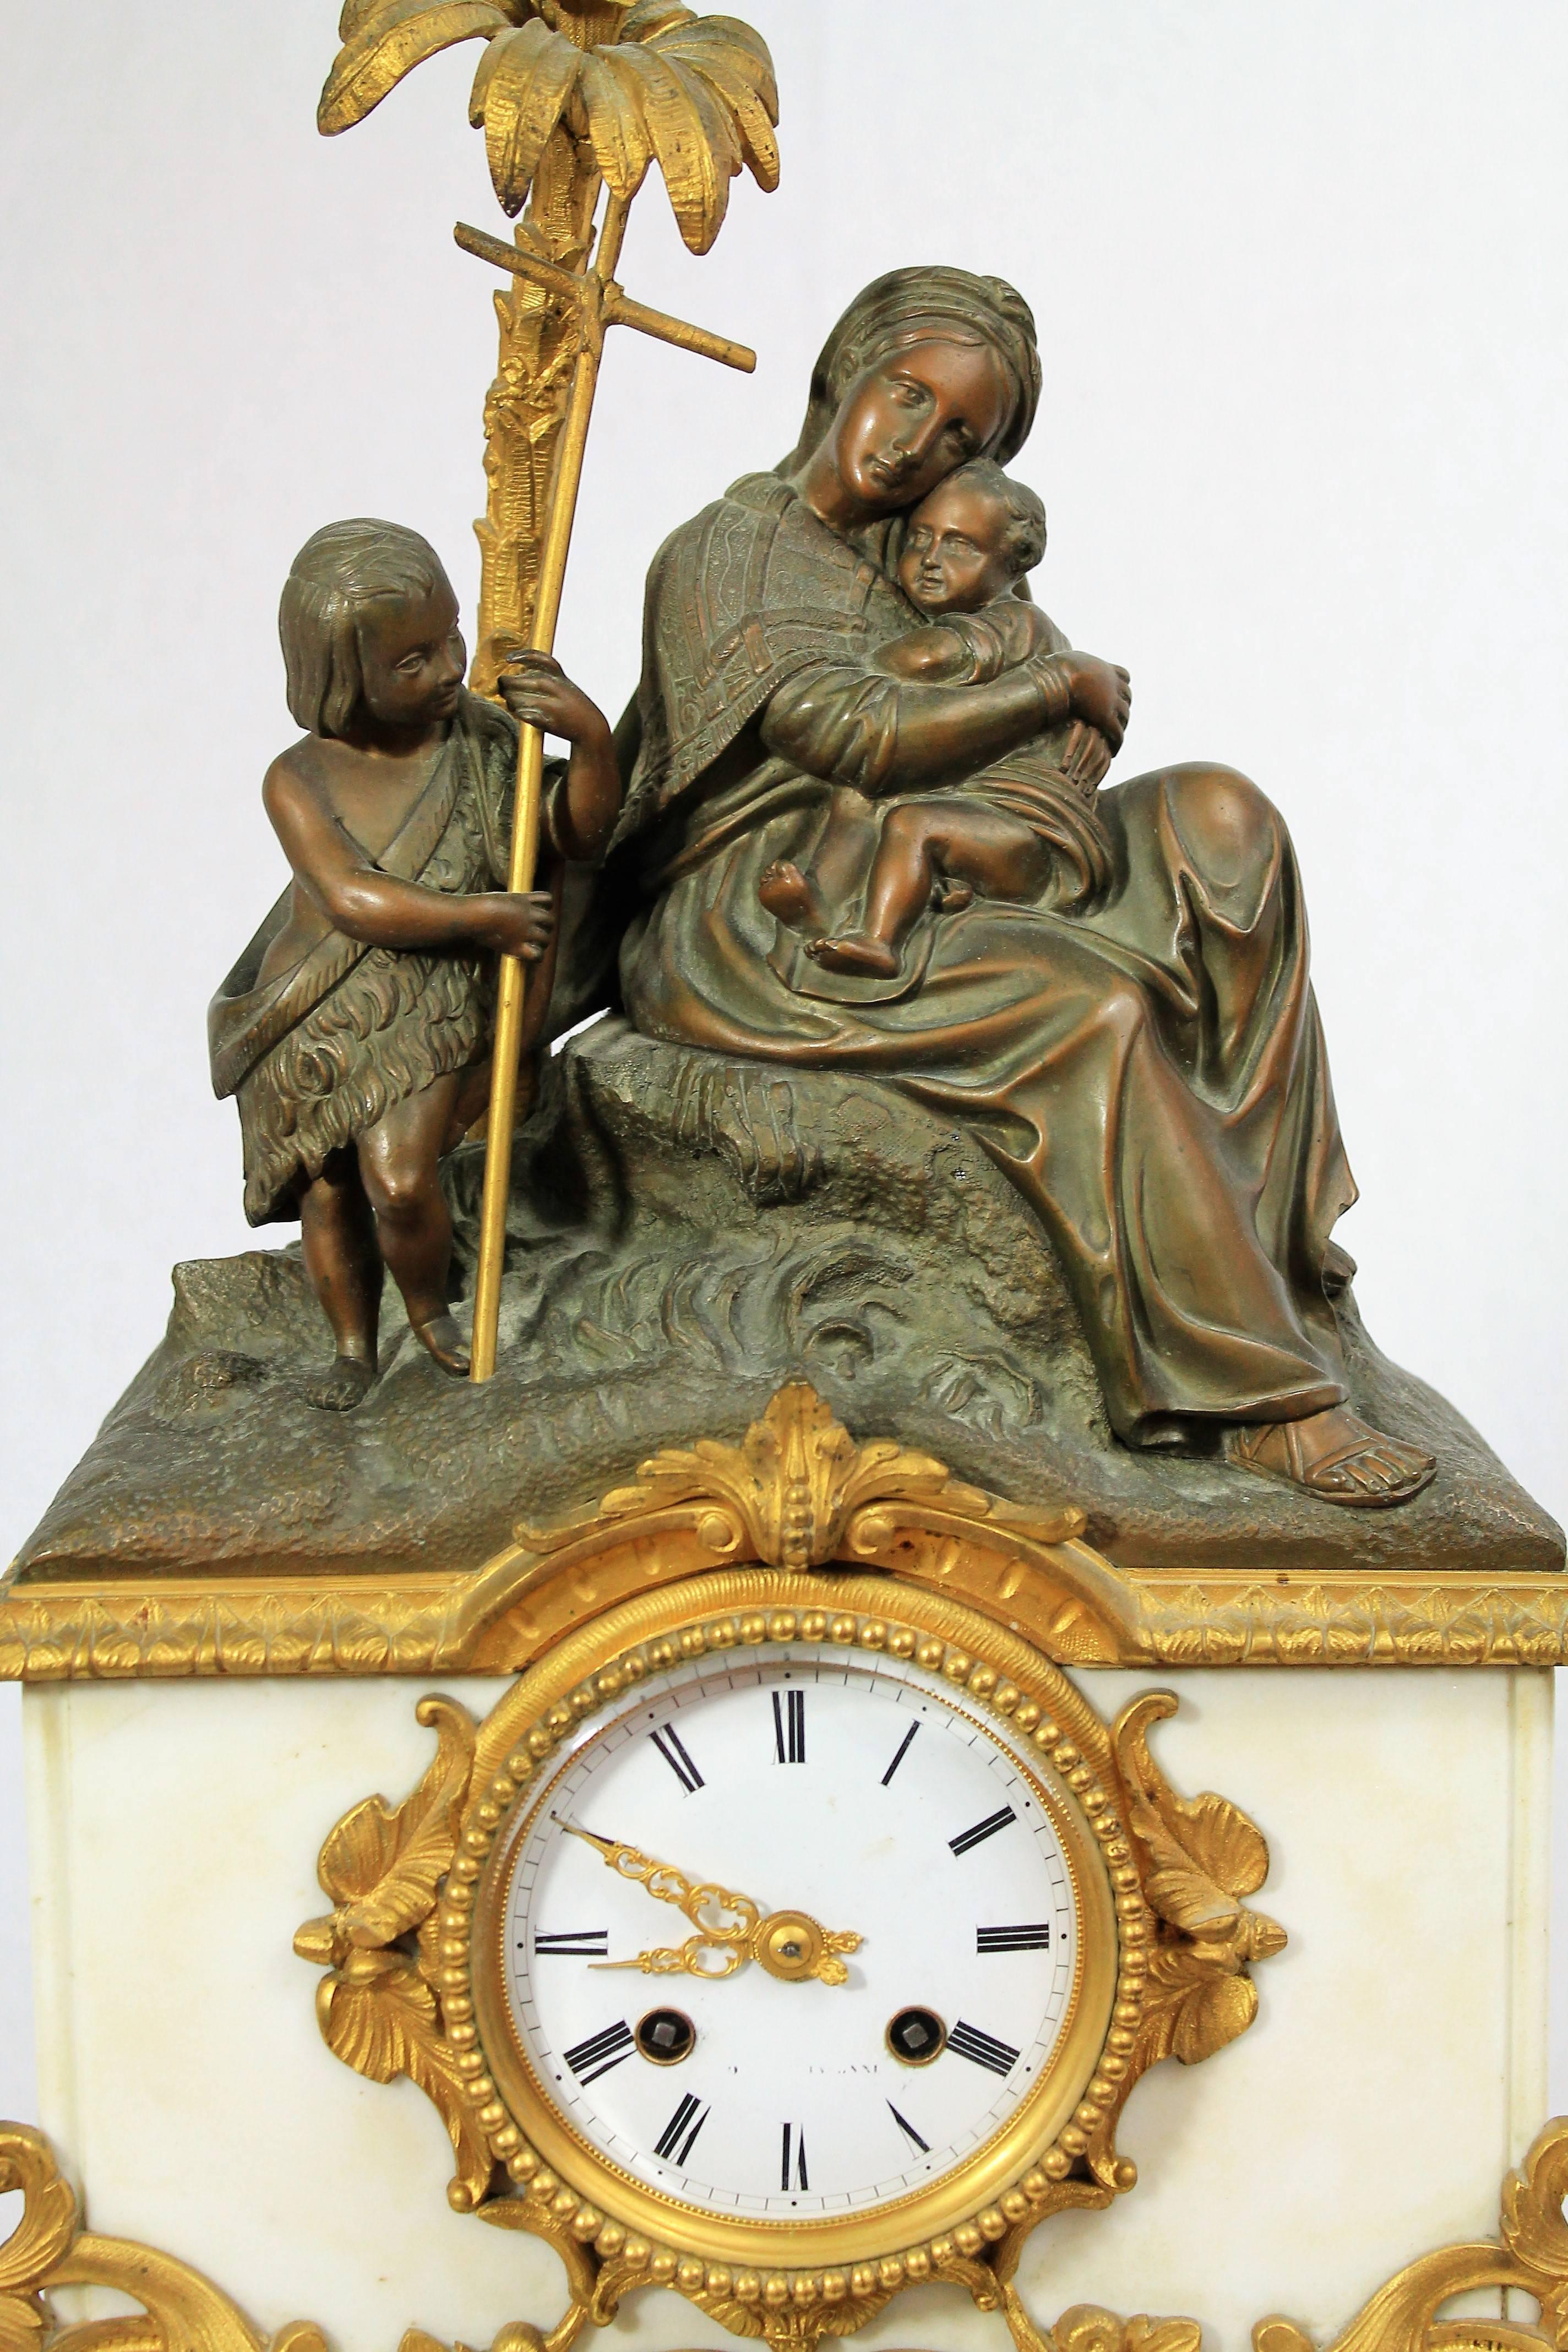 Very beautiful fireplace clock in marble, patinated and gilded bronze representing the Virgin Mary sitting on a rock holding the infant Jesus in her arms, with at their side st John the Baptist child holding his crosier.

Beautiful bronze patina,